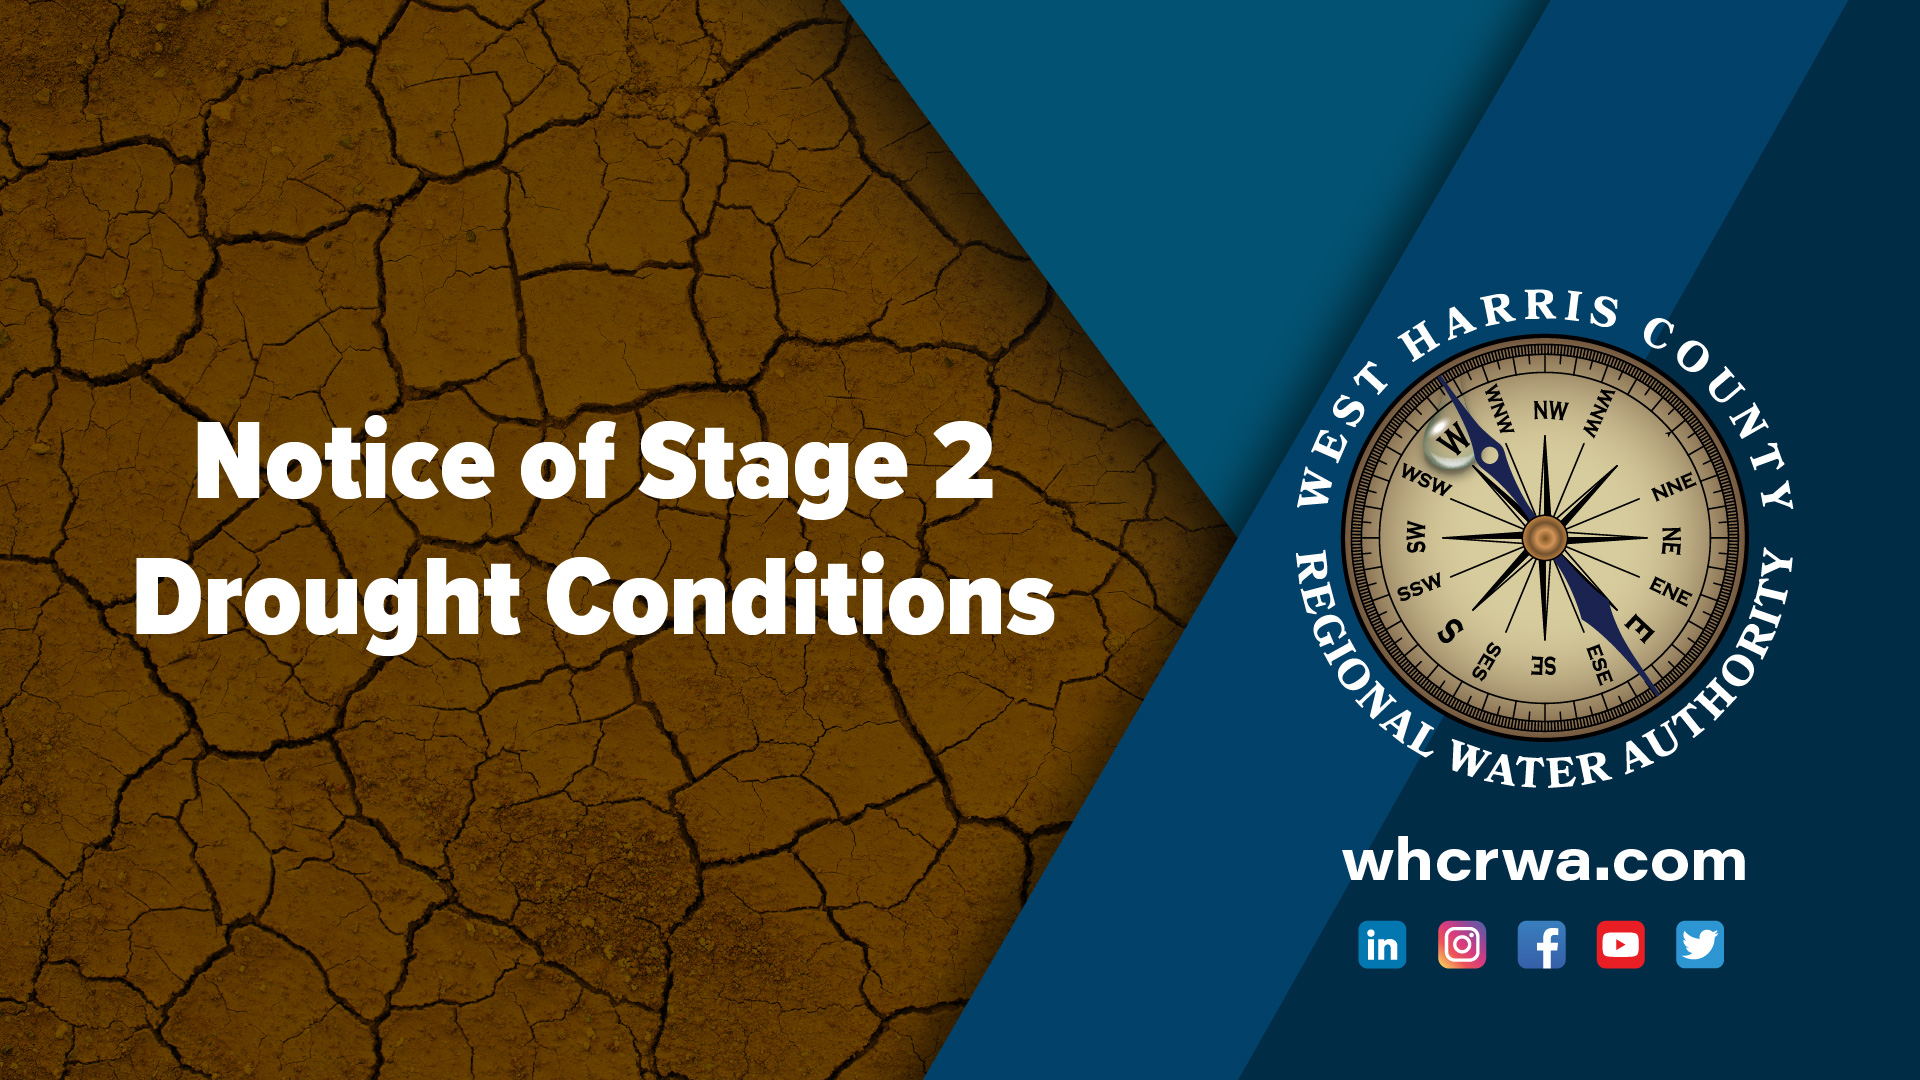 Notice of Stage 2 Drought Conditions